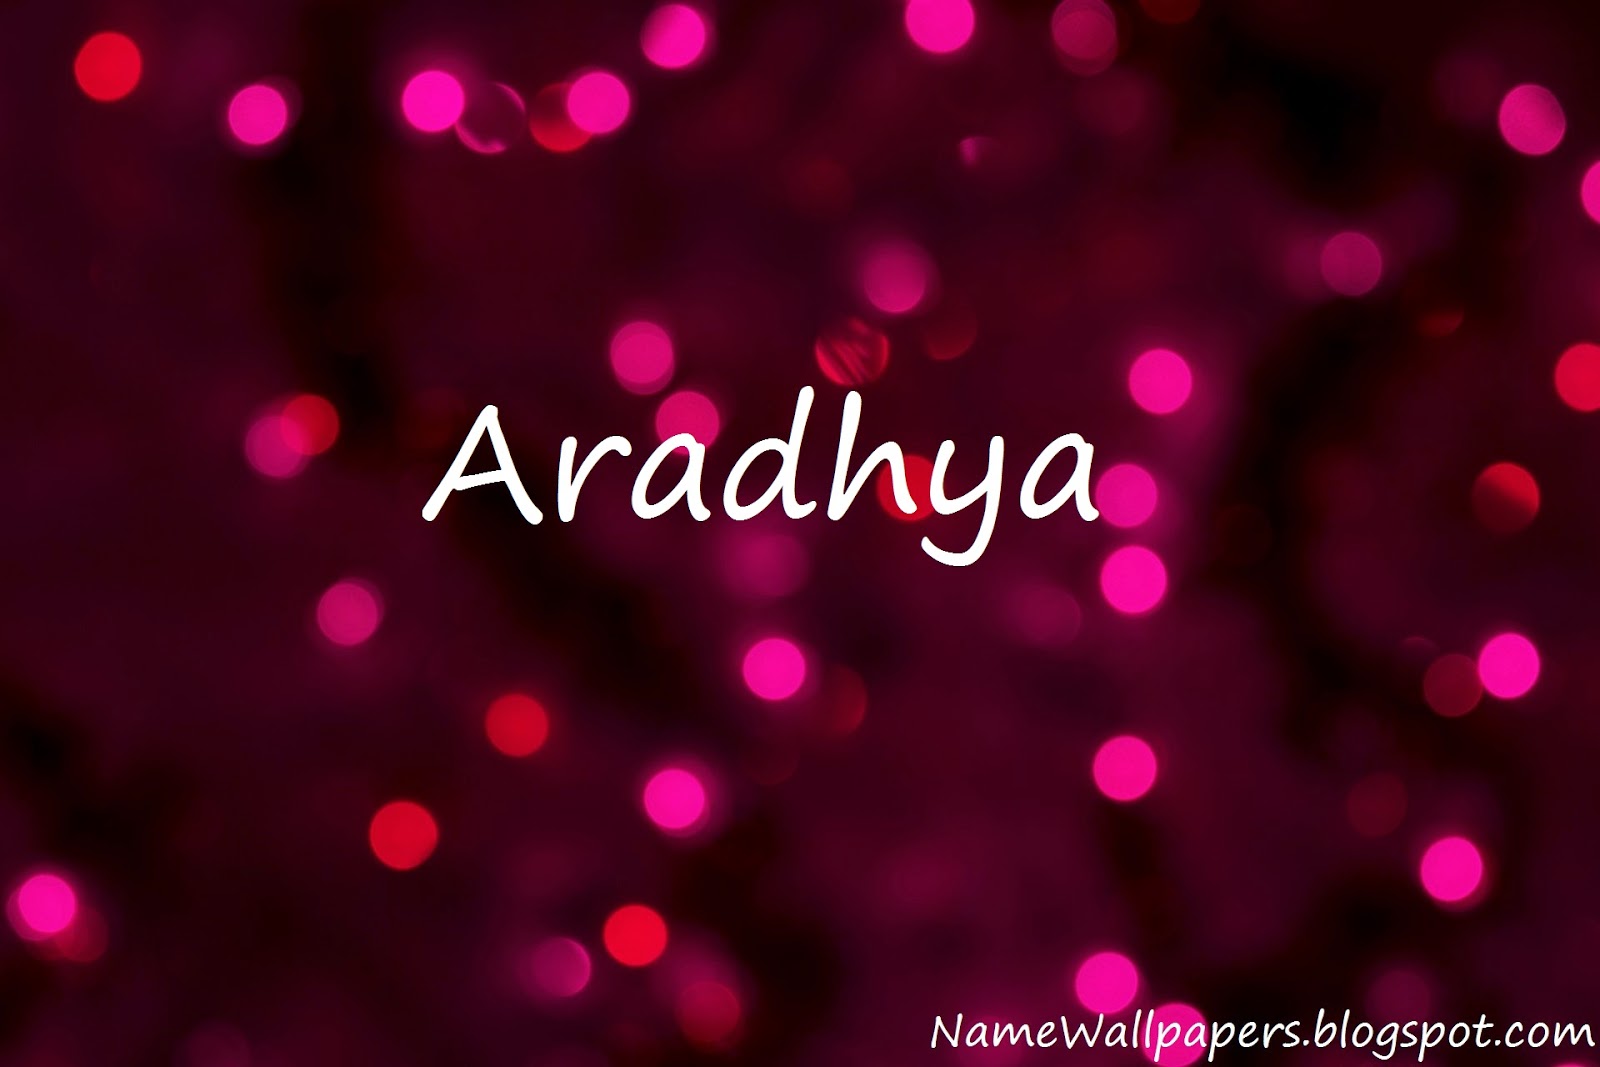 Aradhya Name Wallpapers Aradhya Name Wallpaper Urdu Name Meaning Name Images Logo Signature Aradhya aradhya's is on facebook. name wallpaper urdu name meaning name images logo signature